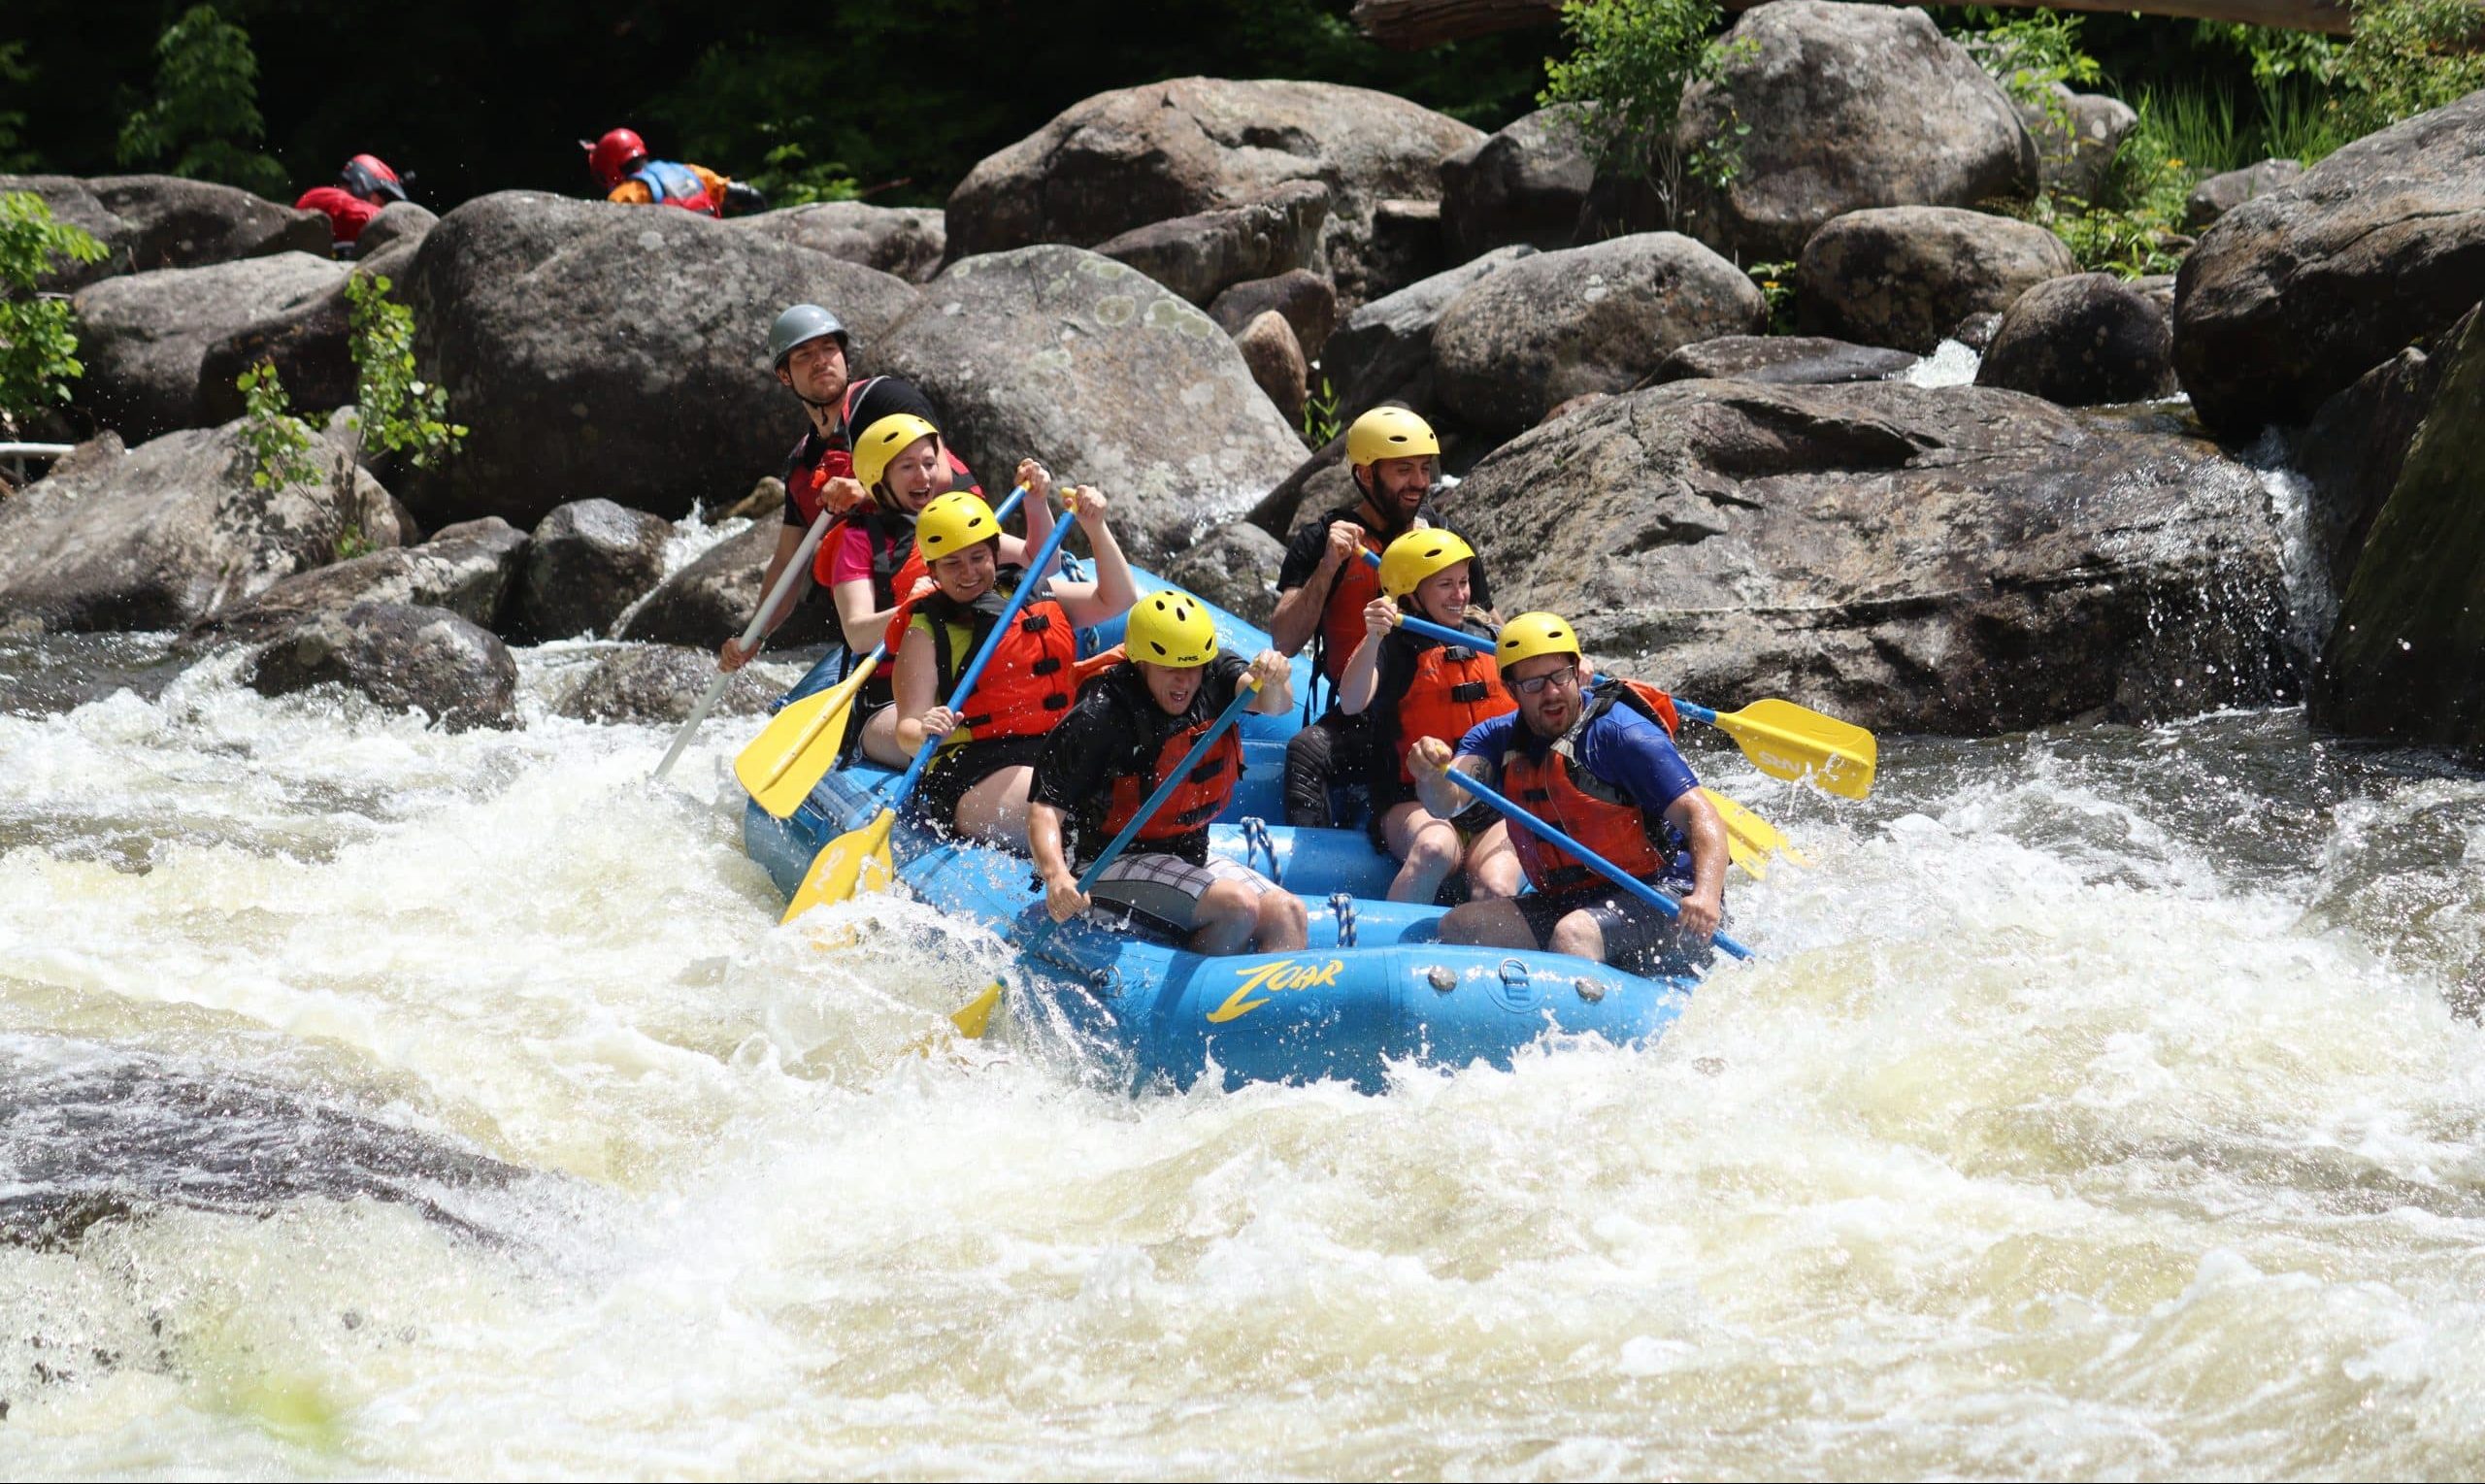 Smiling rafters headed into whitewater on a sunny day on the Deerfield River